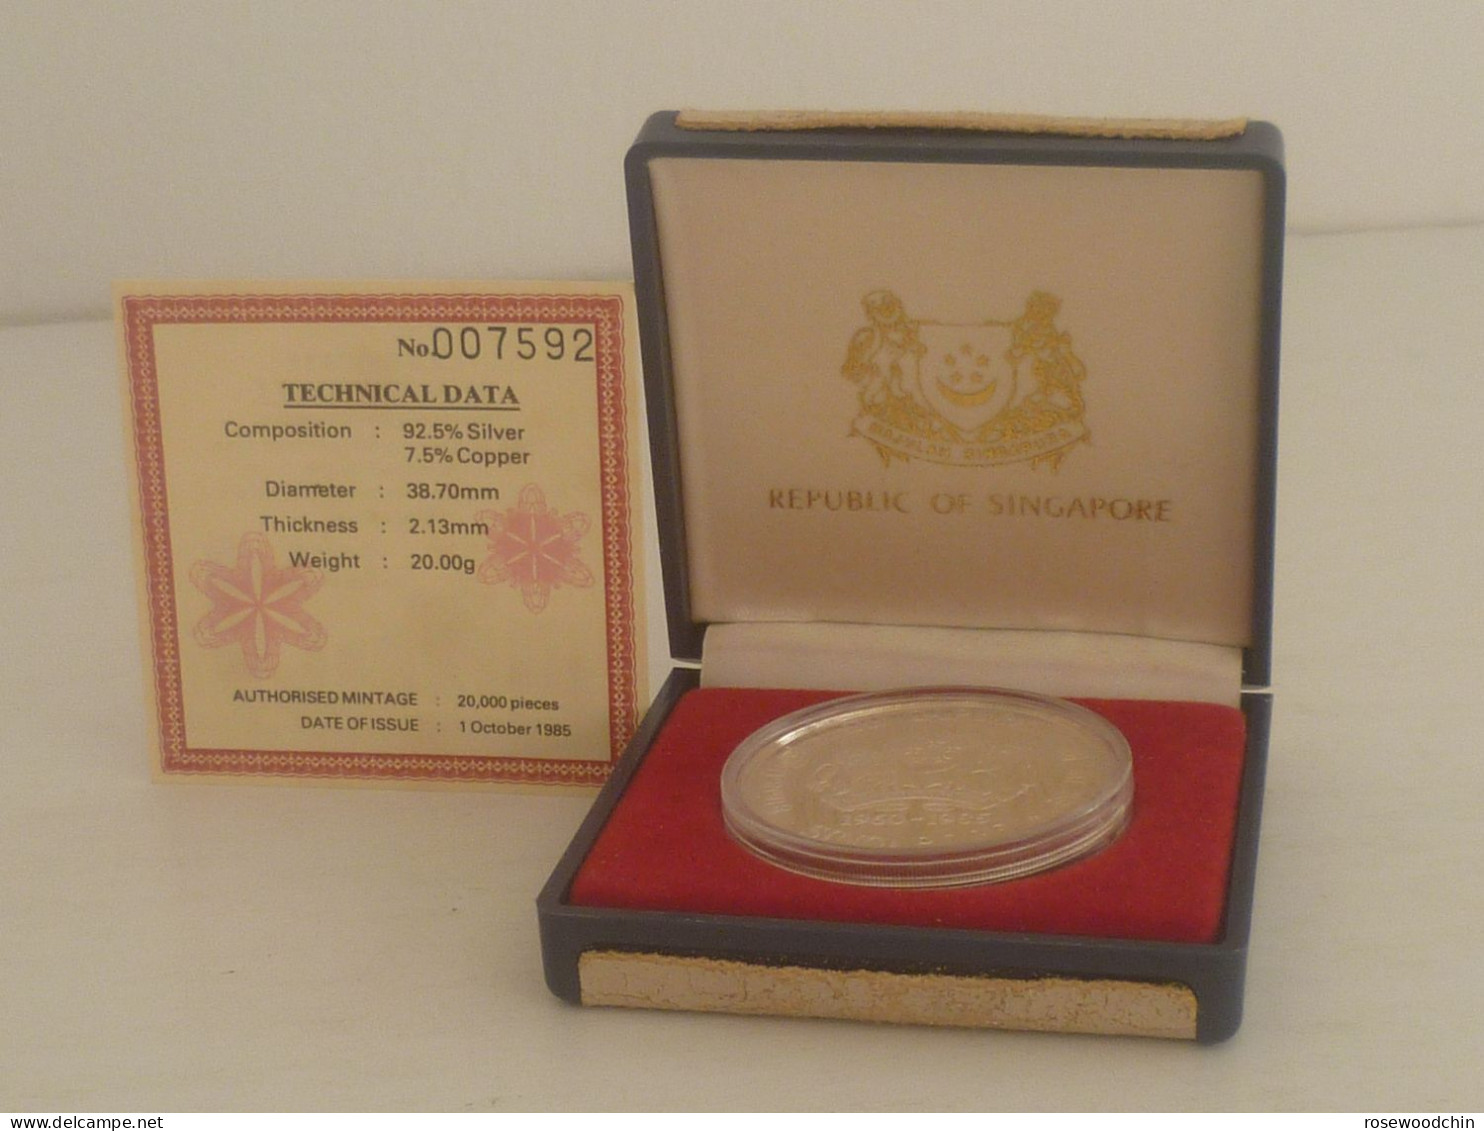 Old 1985 Singapore $5 STERLING SILVER PROOF COIN -25 Years Of Public Housing (Ref: 007592) - Singapore